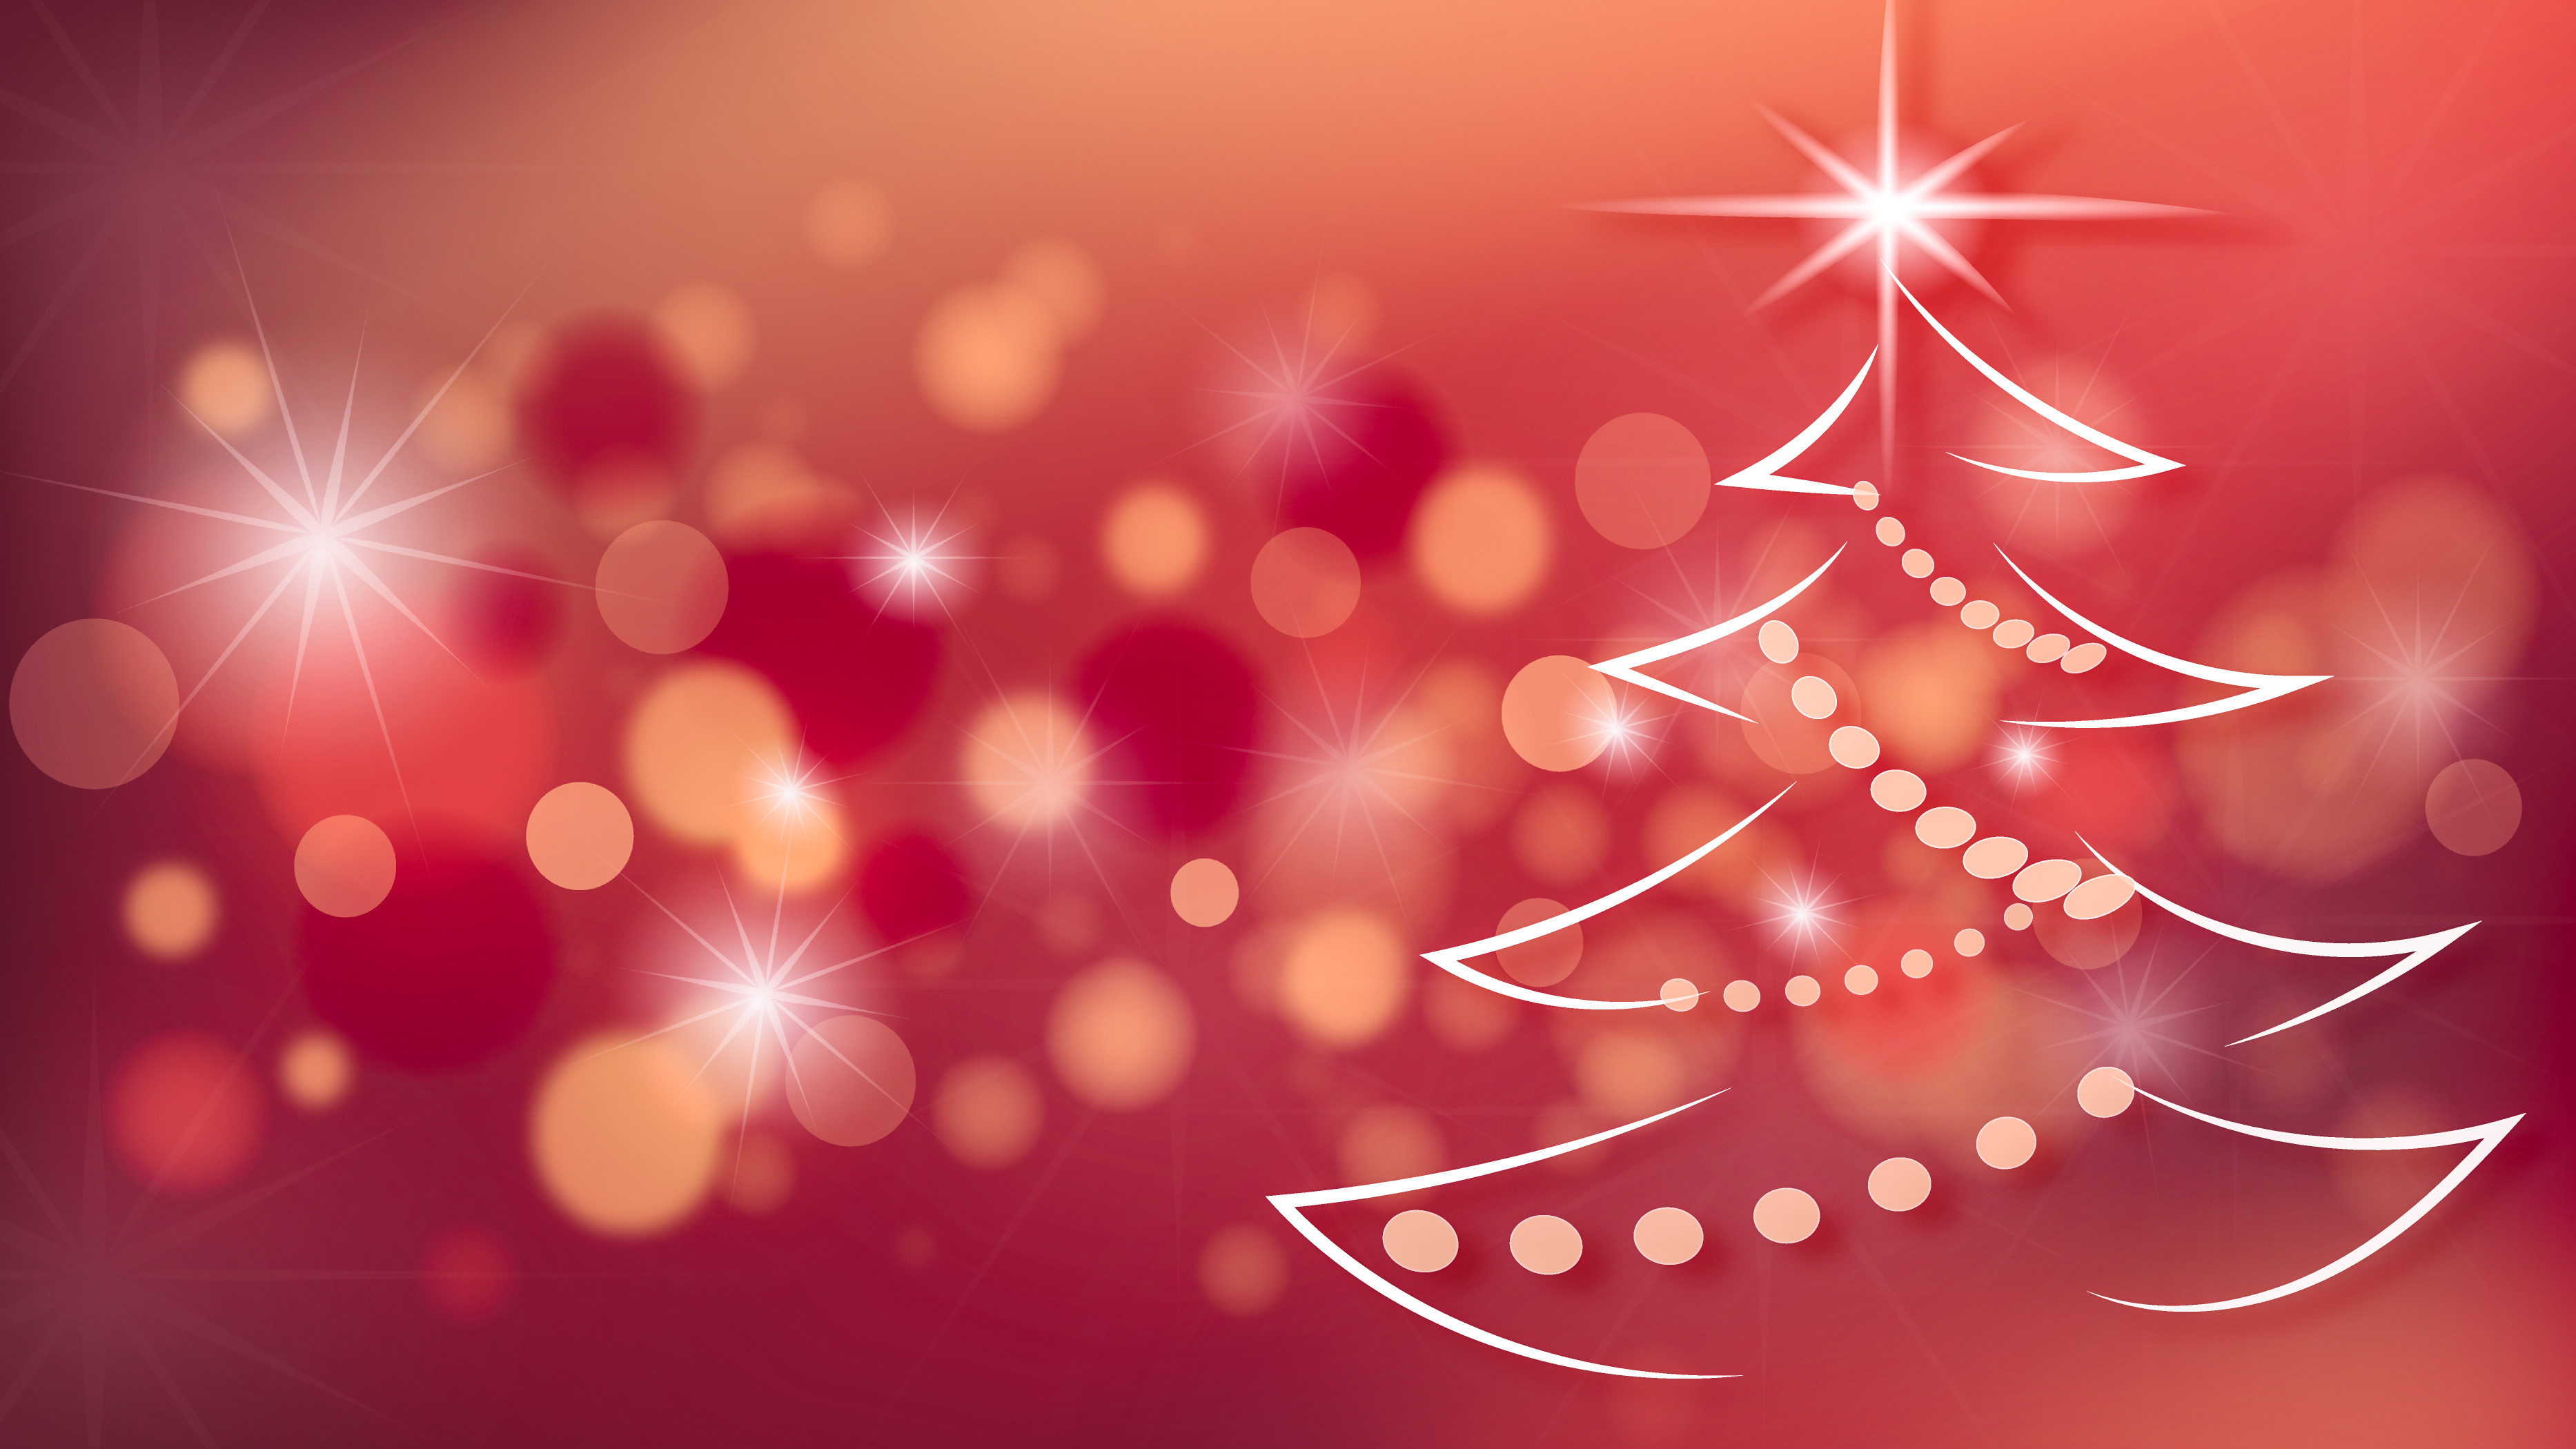 Free Images - Red Christmas Background 4k - HD Wallpaper 